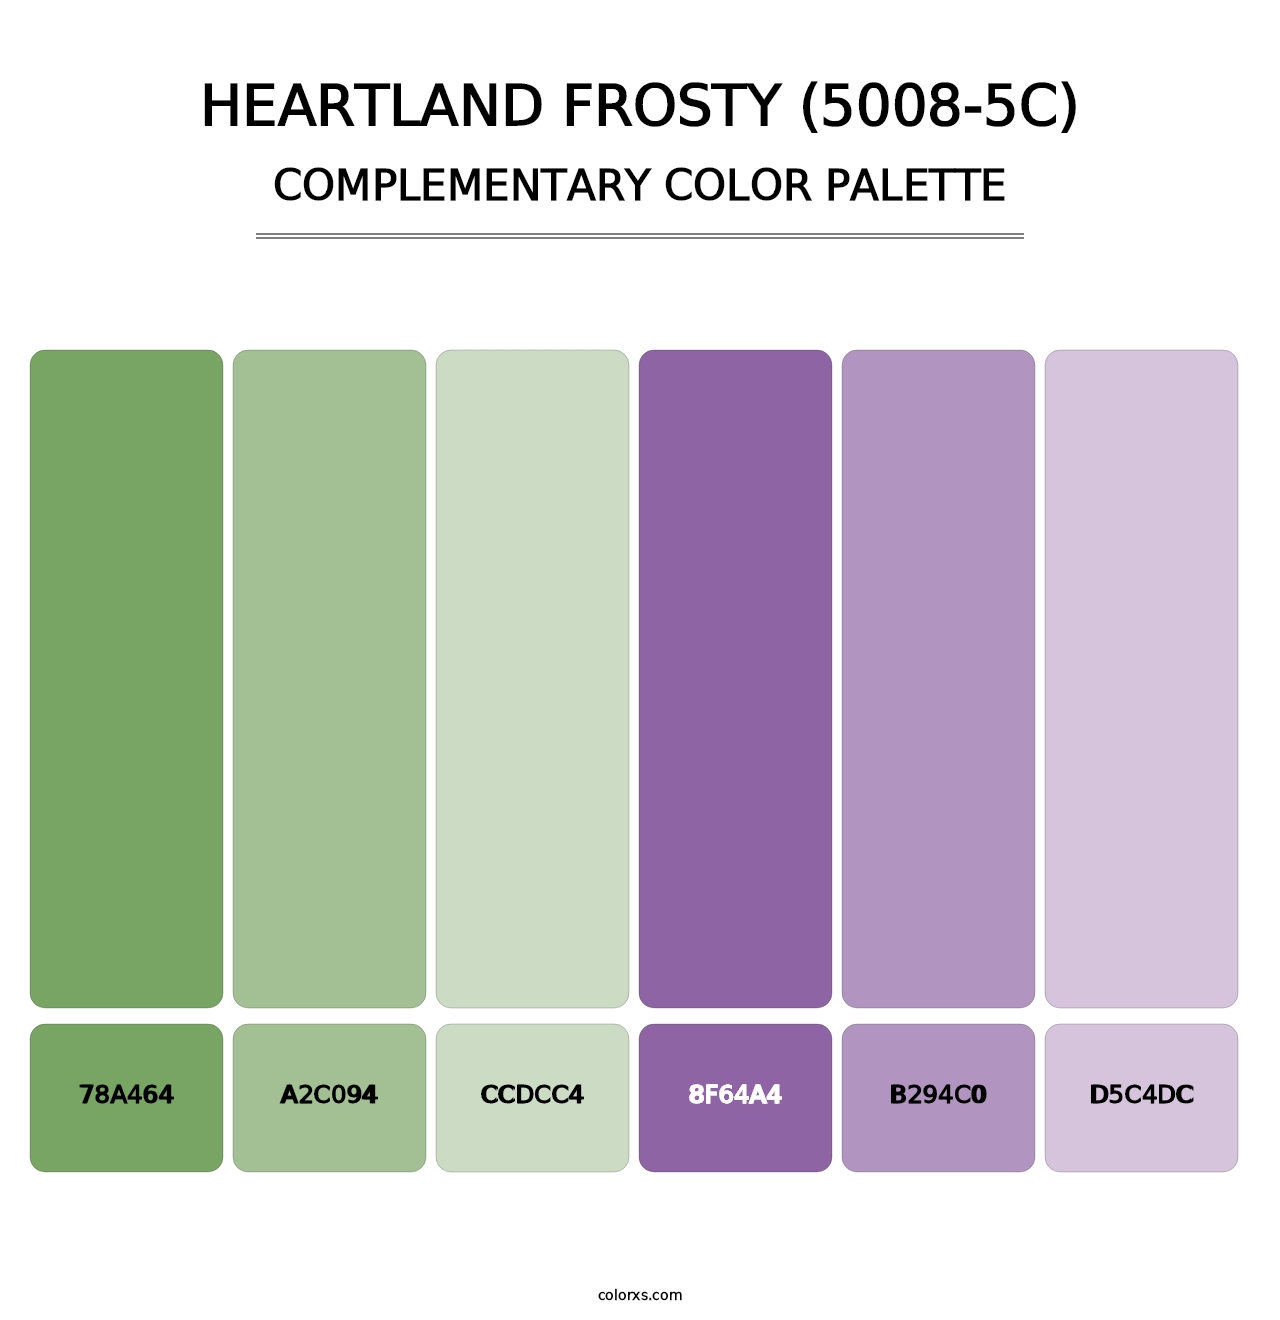 Heartland Frosty (5008-5C) - Complementary Color Palette